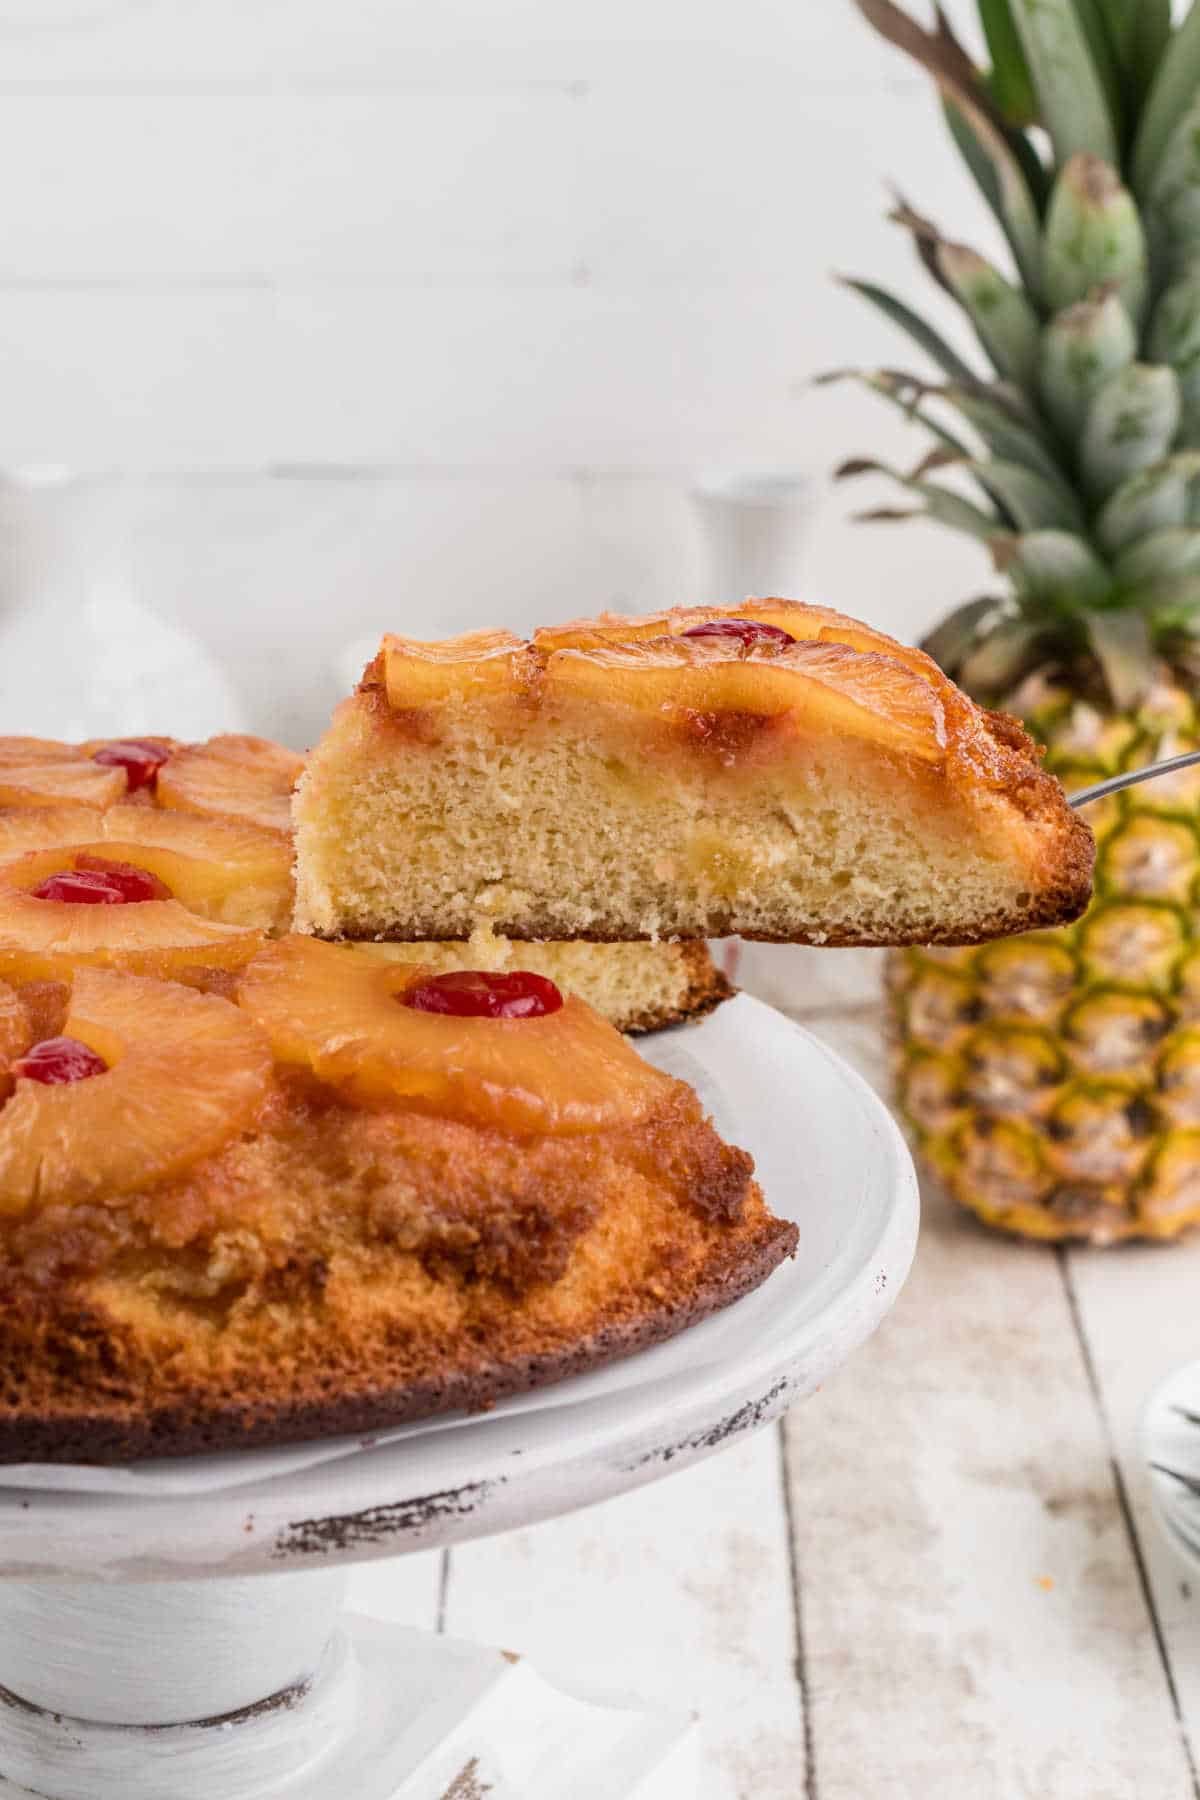 A slice of pineapple upside down cake being lifted out of the cake.